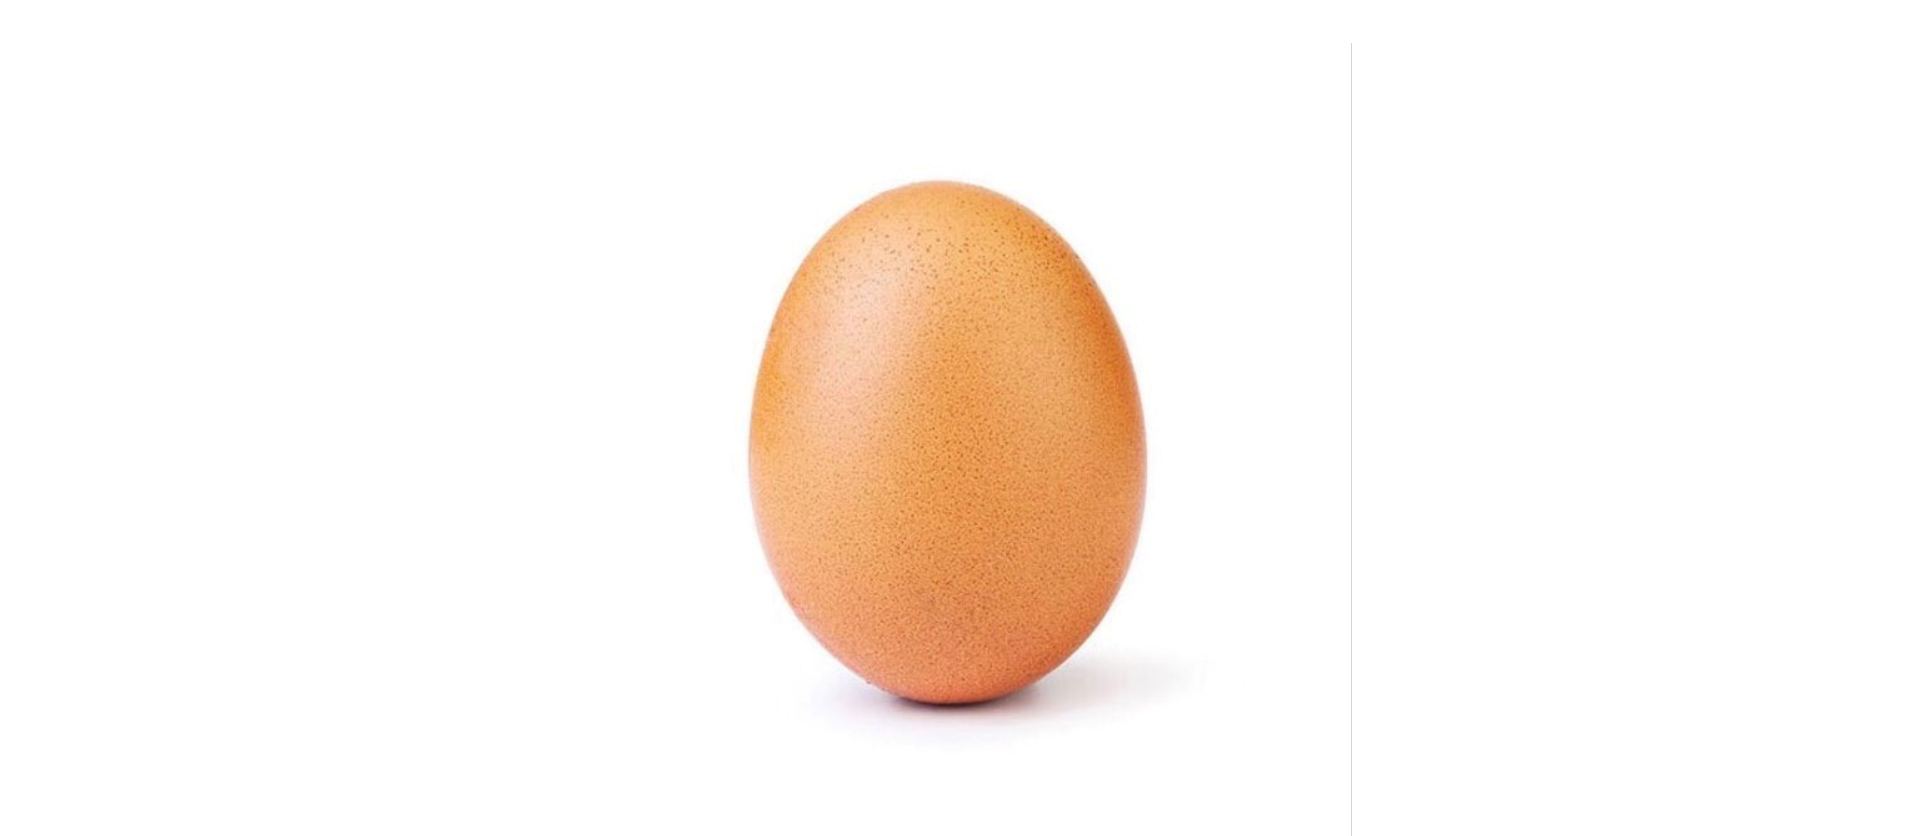 After Instagram, an egg now wants to conquer Twitter as well